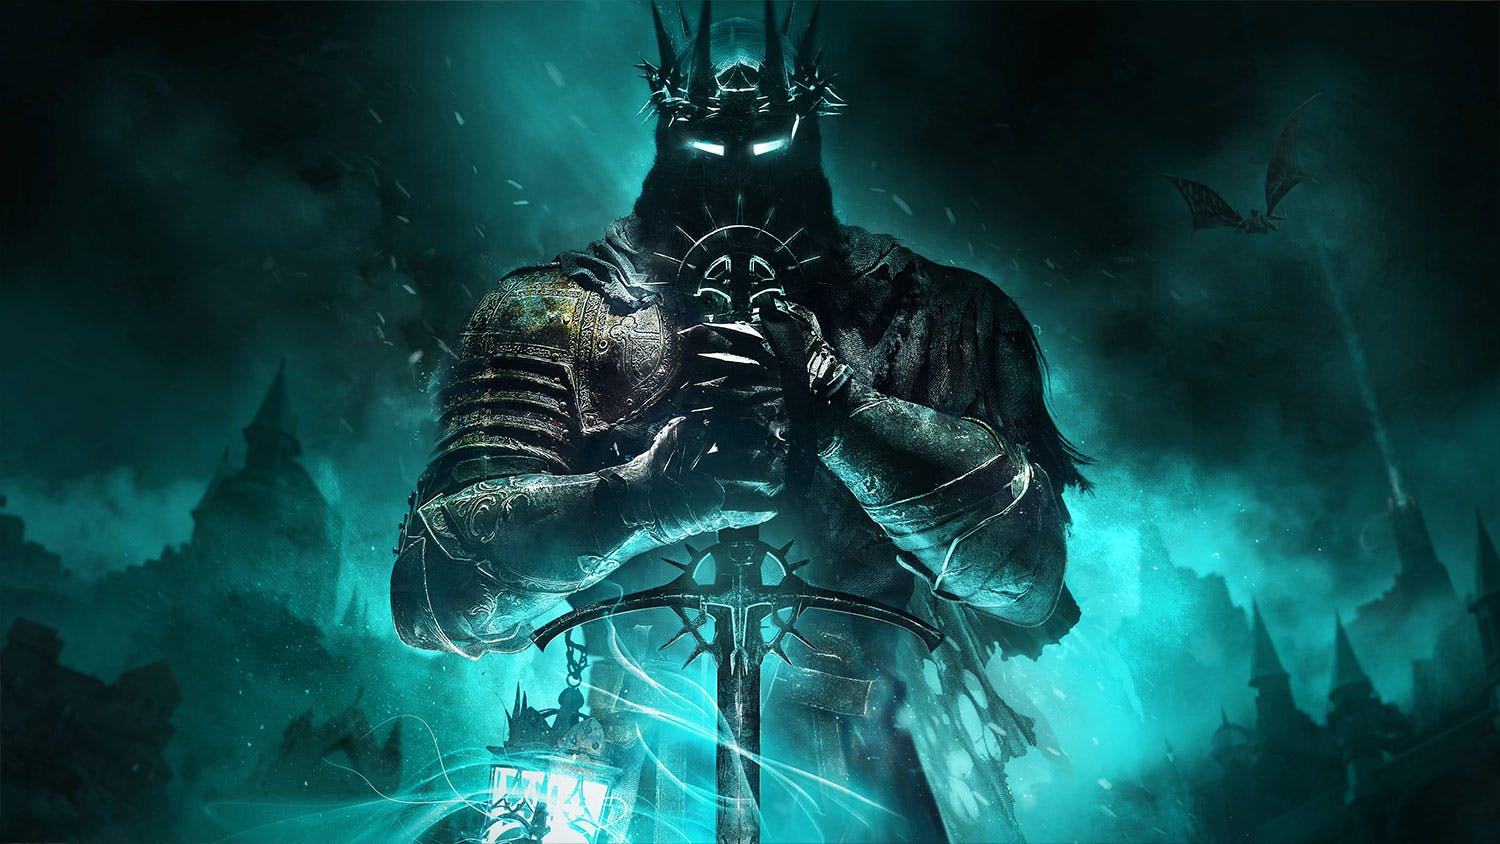 Lords of the Fallen Players' Reviews - TapTap